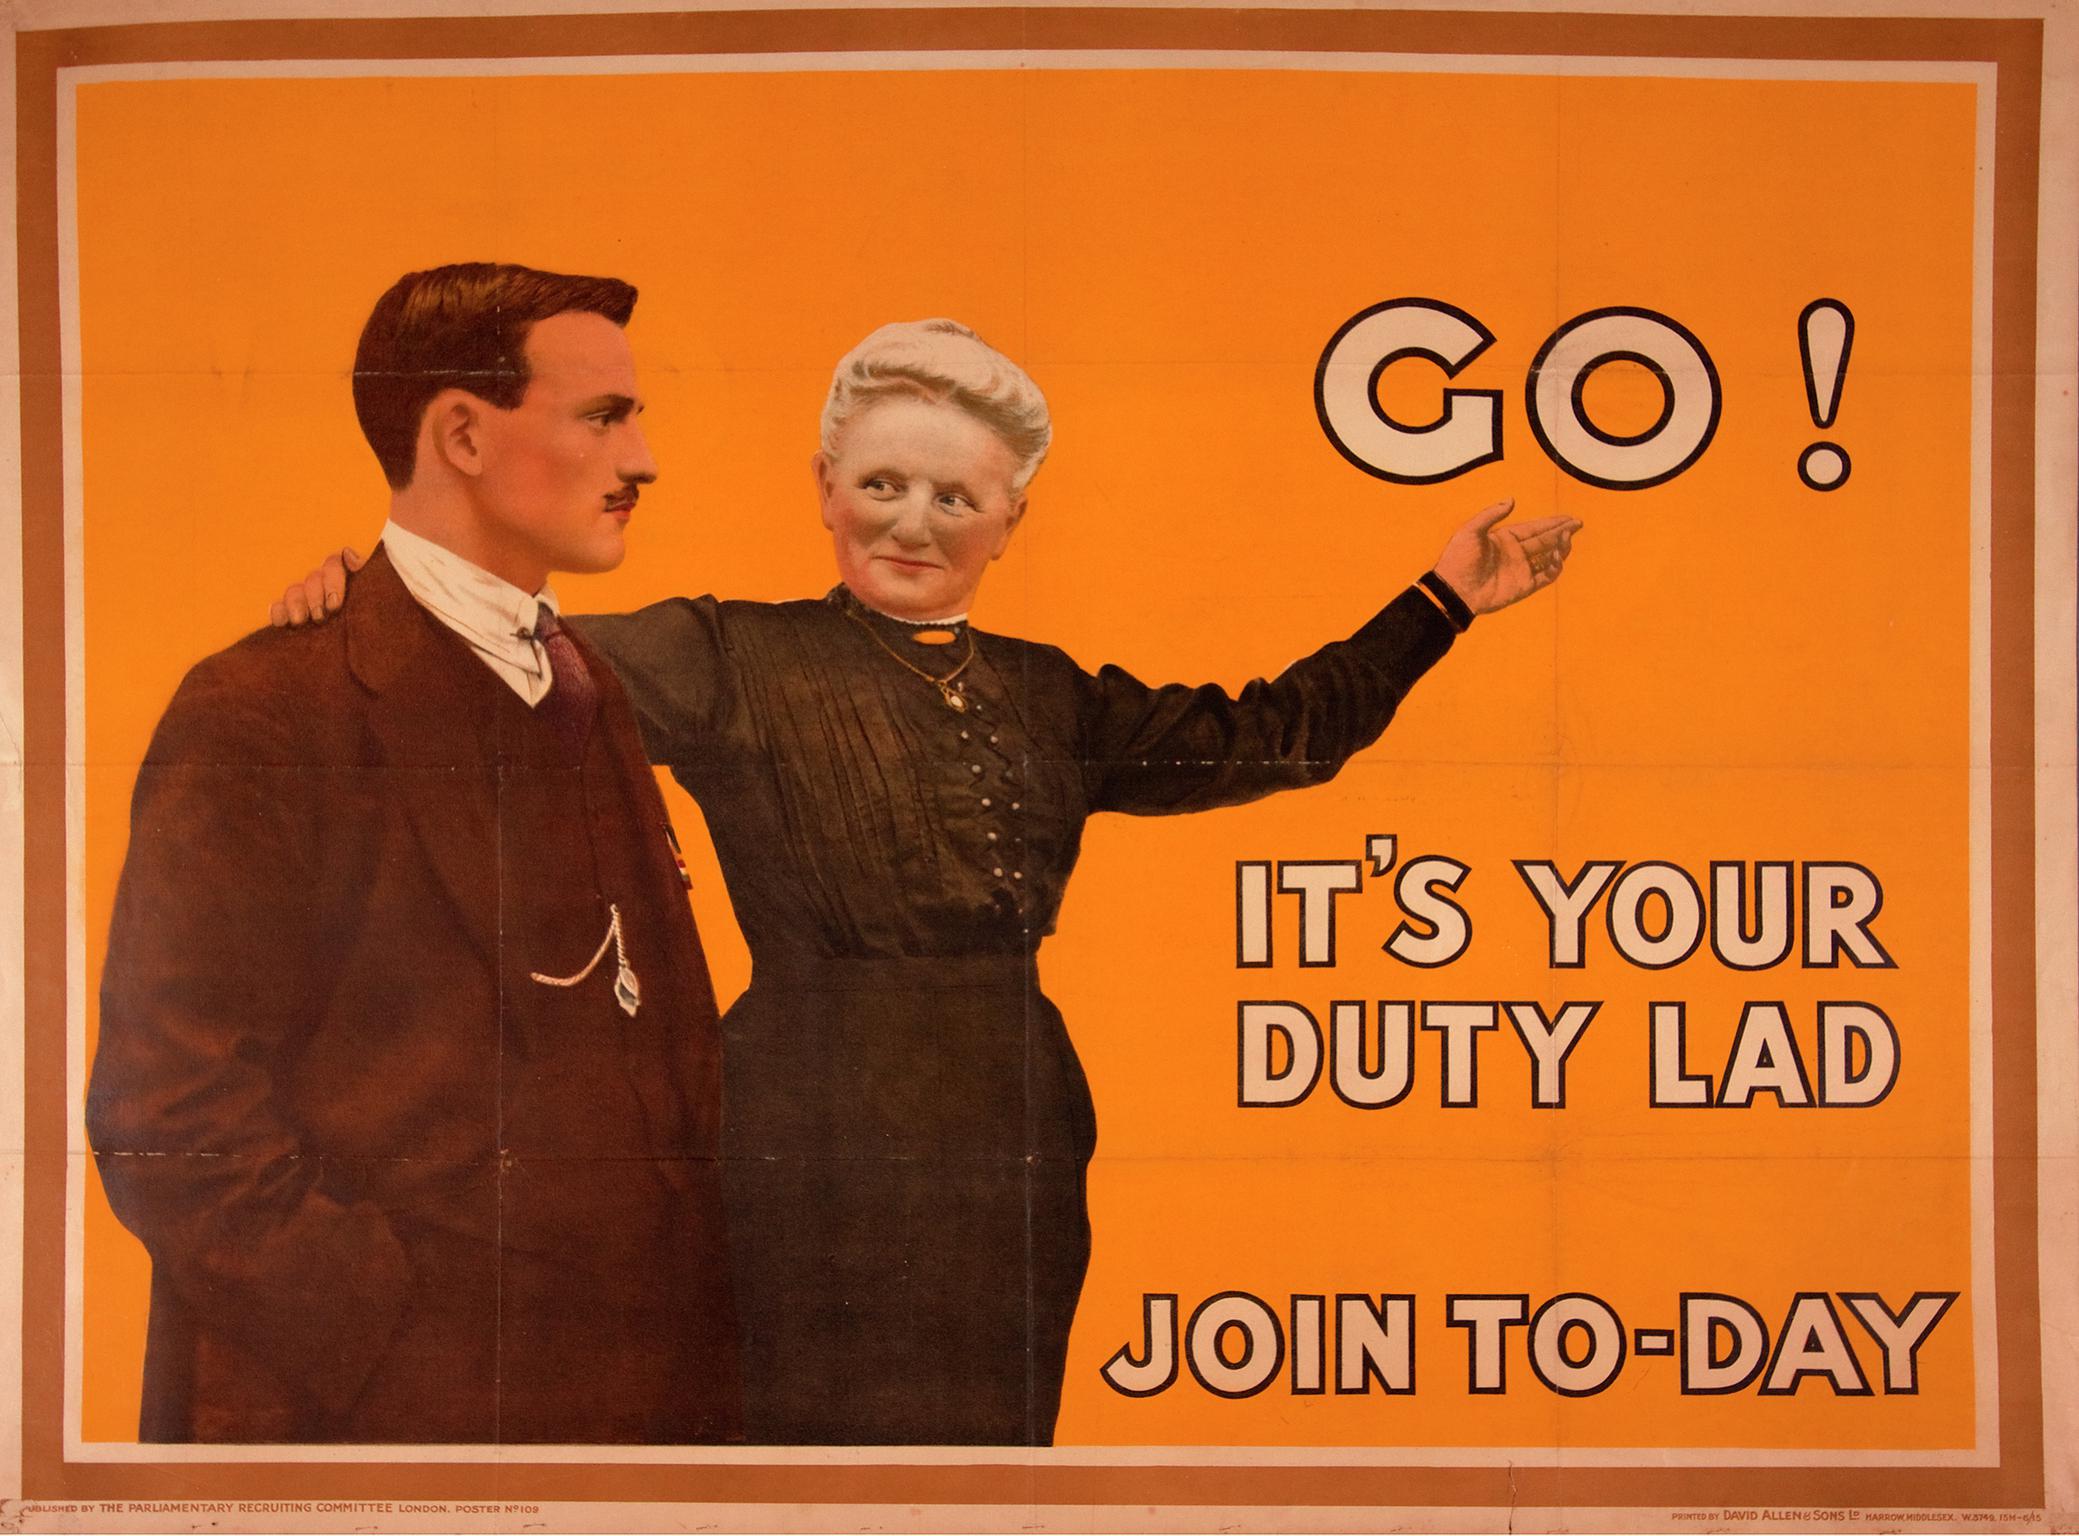 Go! It's your duty Lad, Join Today